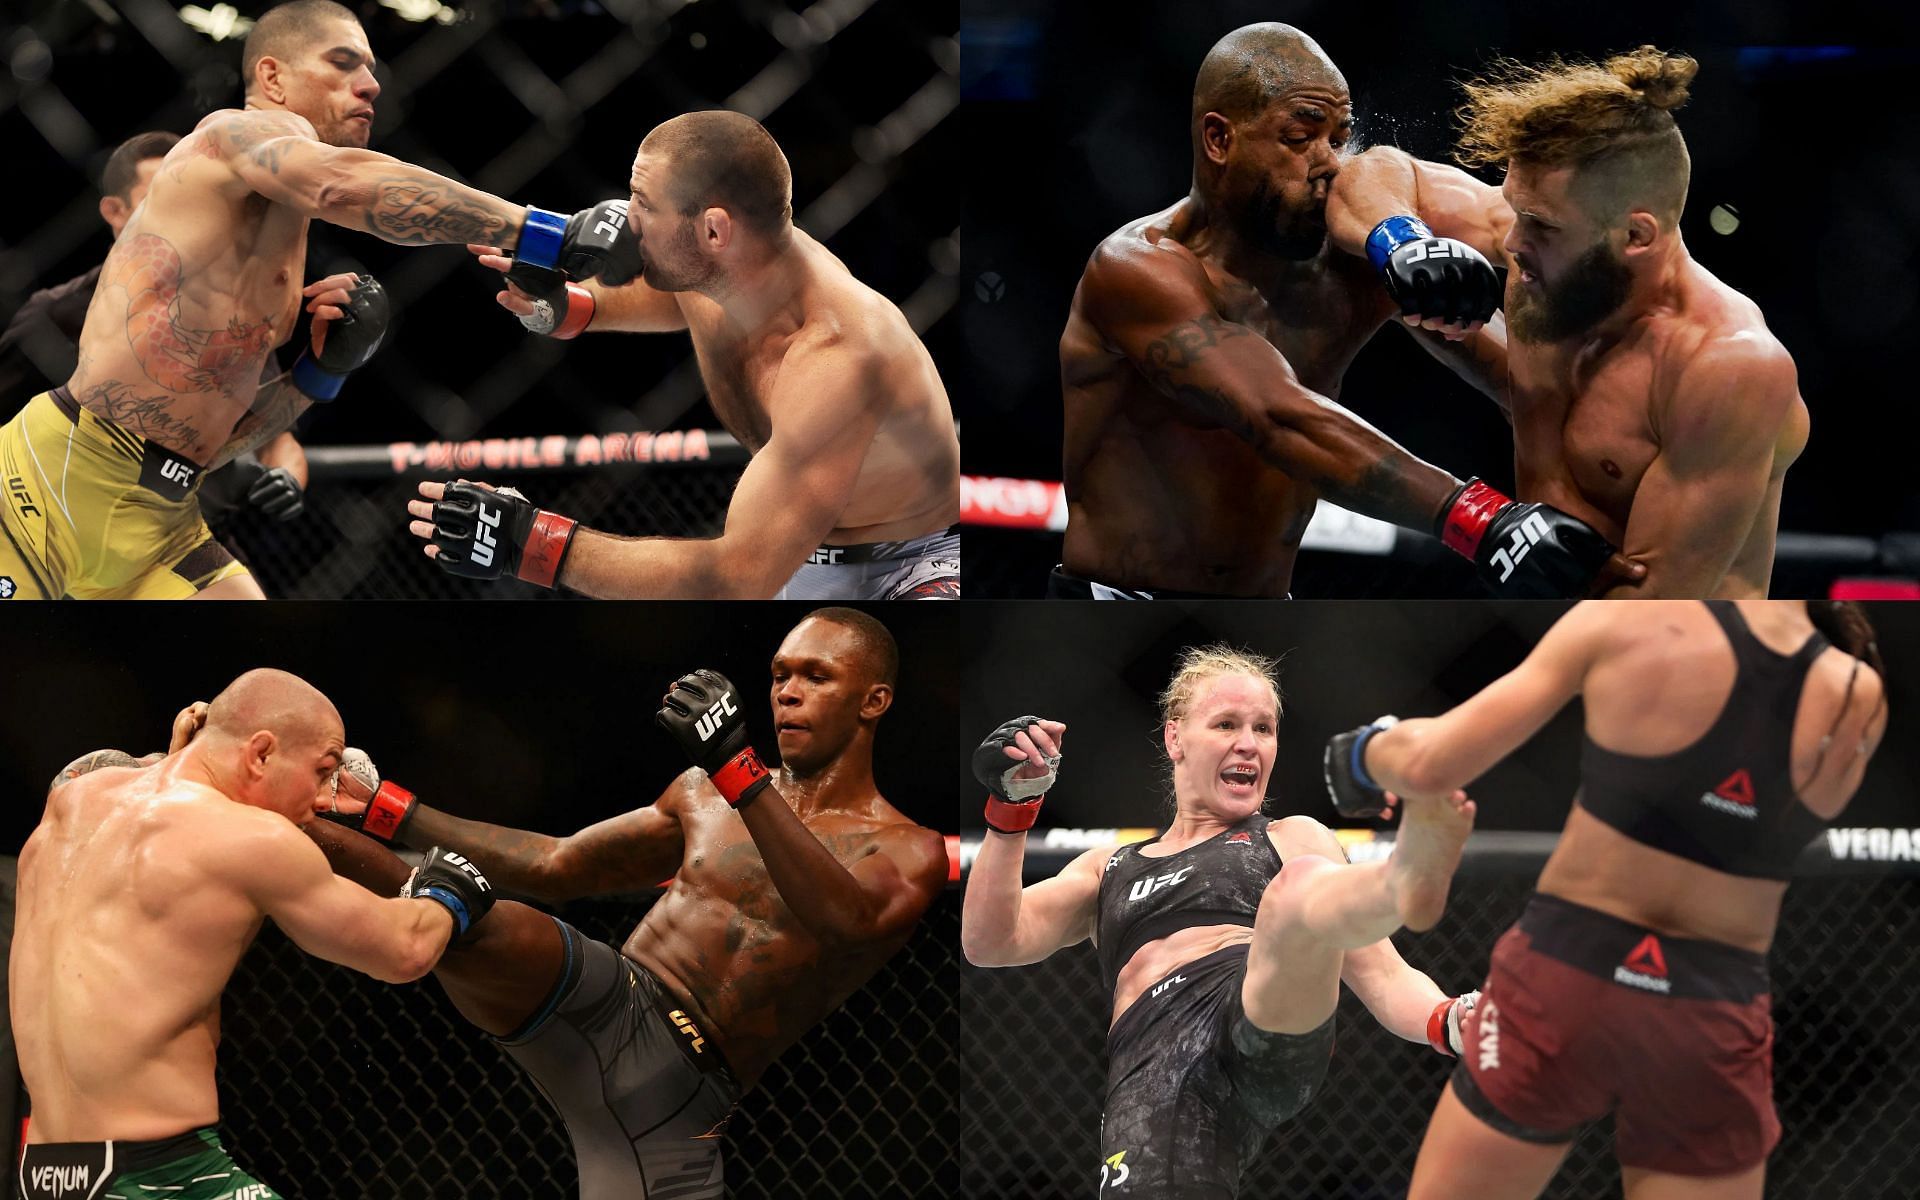 10 Up-and-Coming MMA Fighters To Watch